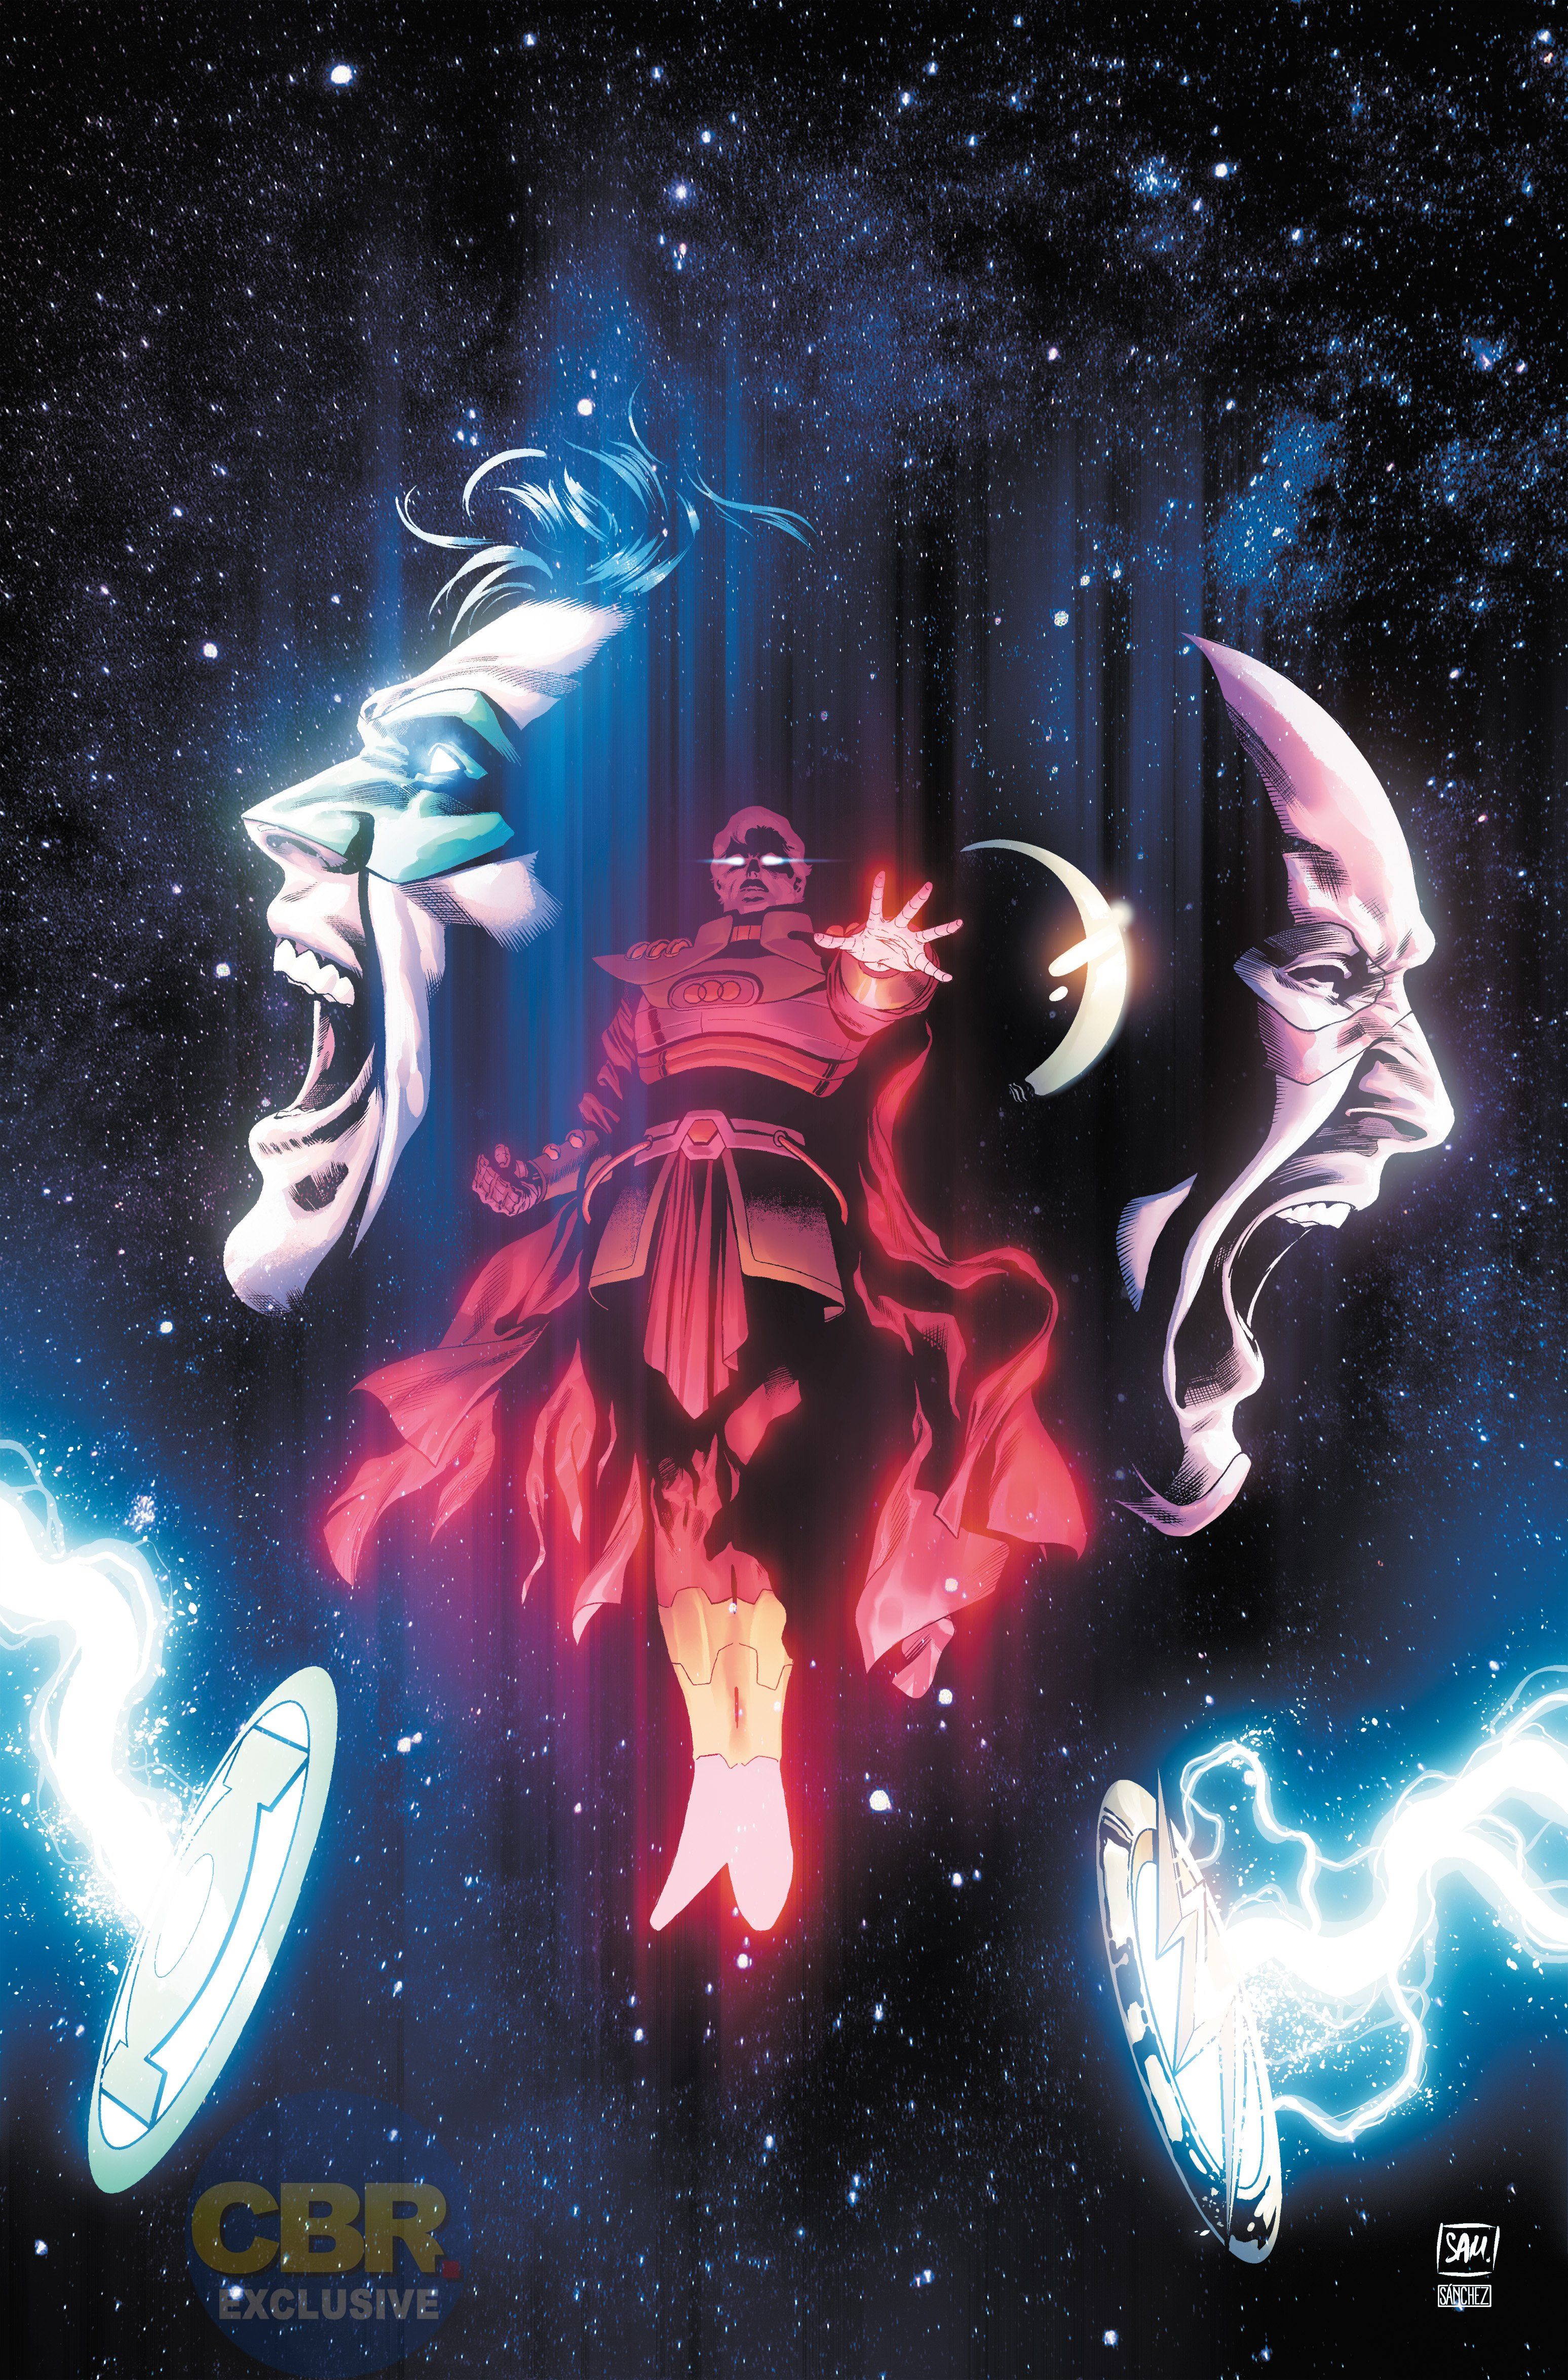 EXCLUSIVE: Dark Crisis Introduces a New DC Multiverse Tied to the Flash